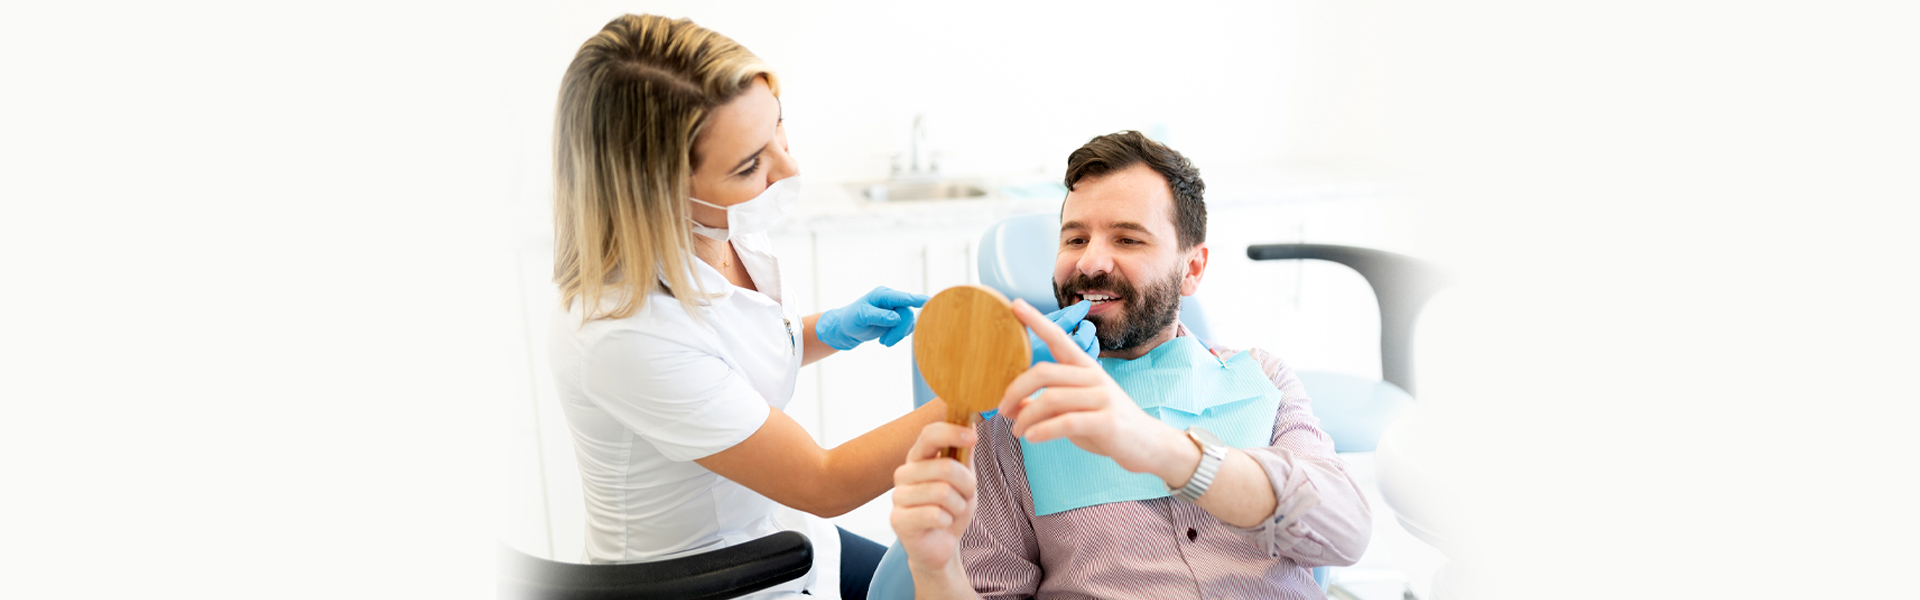 Permanent and Temporary Dental Crowns: Which One is Much Better?